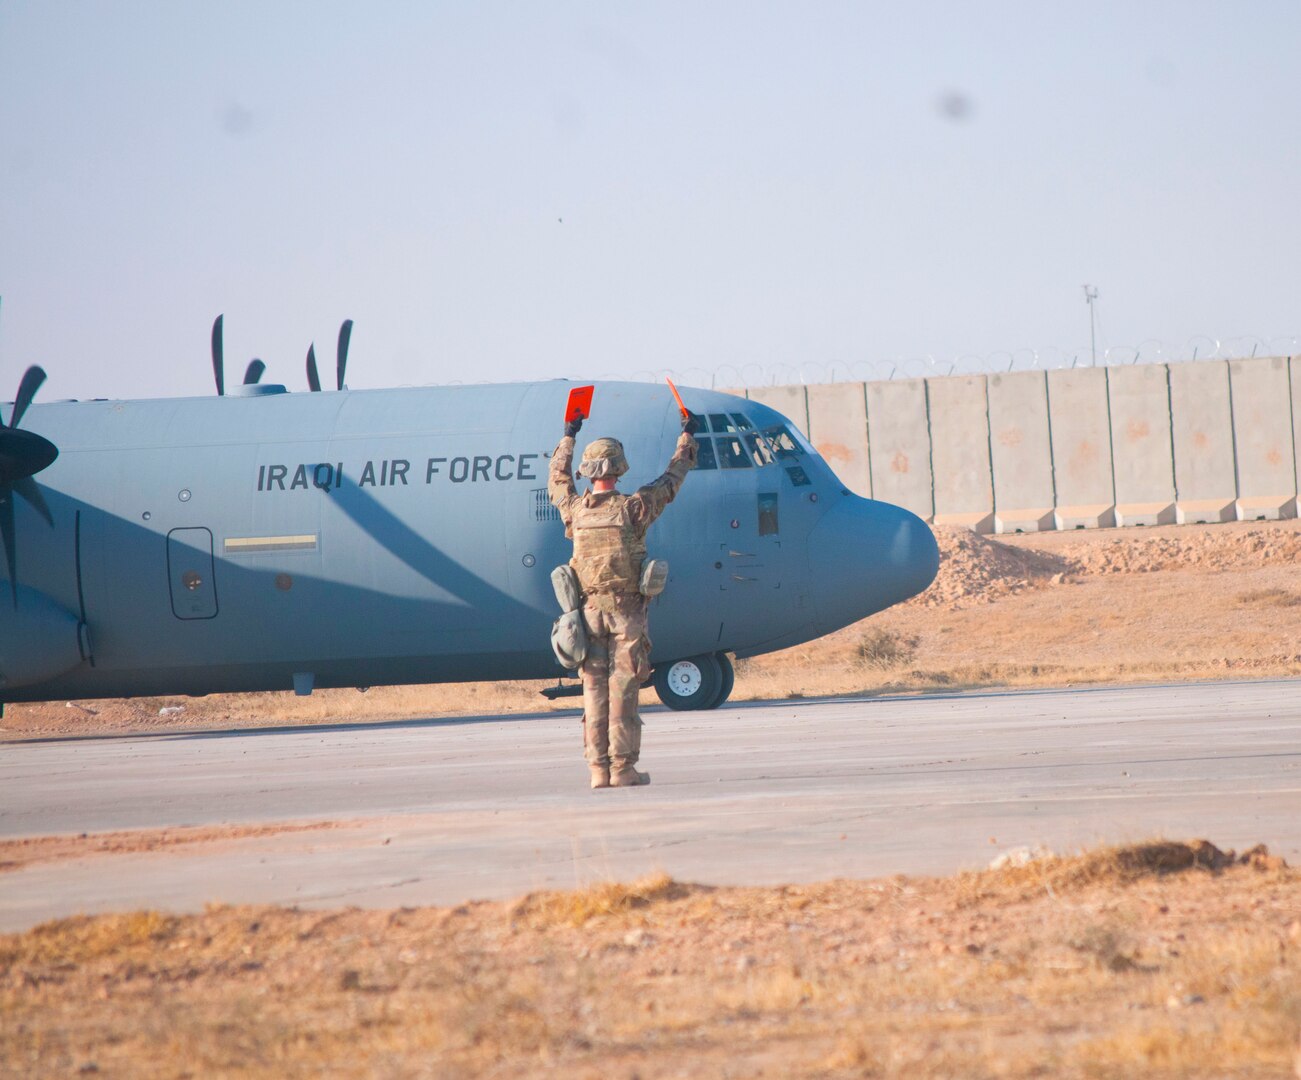 A U.S. Air Force Airman with the 821st Crisis Response Group, signals a taxing Iraqi air force C-130J Super Hercules at Qayyarah West Airfield, Iraq, Oct. 30, 2016. This was the first time a fixed wing aircraft from Iraqi security forces landed at Qayyarah West Airfield since the base was occupied by Islamic State of Iraq and the Levant in 2014. Coalition forces reconstructed the airfield as part of their effort to assist the Iraqi security forces as the seize territory from ISIL. Qayyarah West Airfield serves as a logistics hub for ongoing operations in northern Iraq. (U.S. Army photo by 1st Lt. Daniel Johnson)